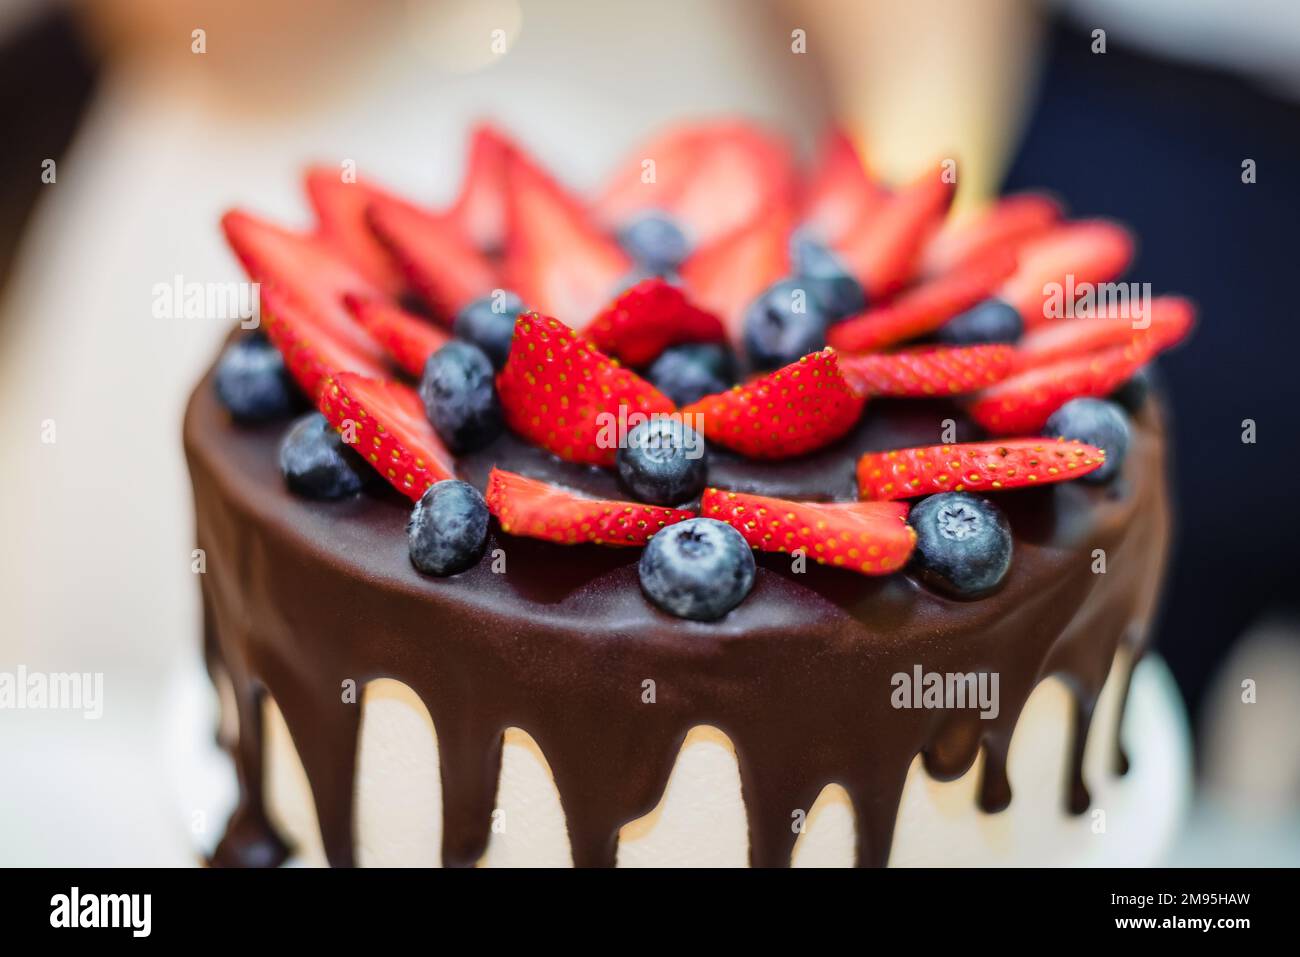 strawberry and bilberry berries on a chocolate icing cake closeup Stock Photo